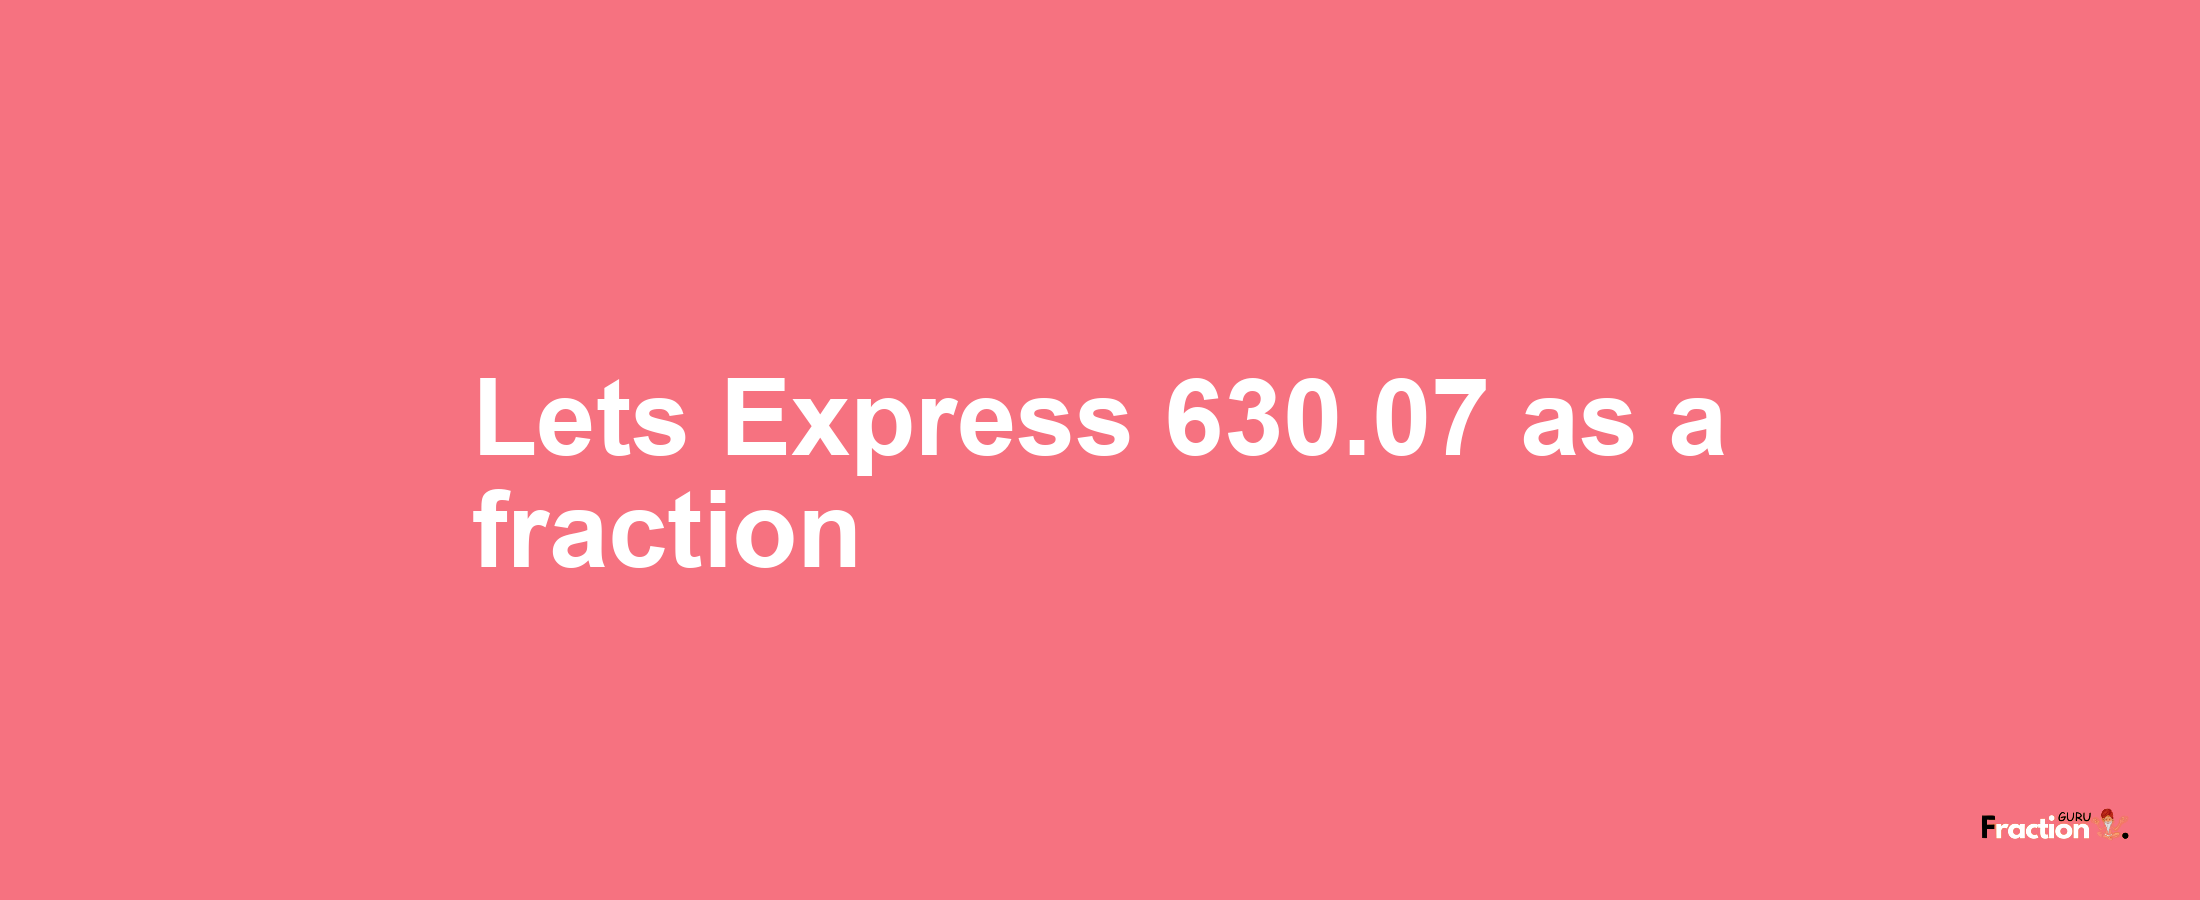 Lets Express 630.07 as afraction